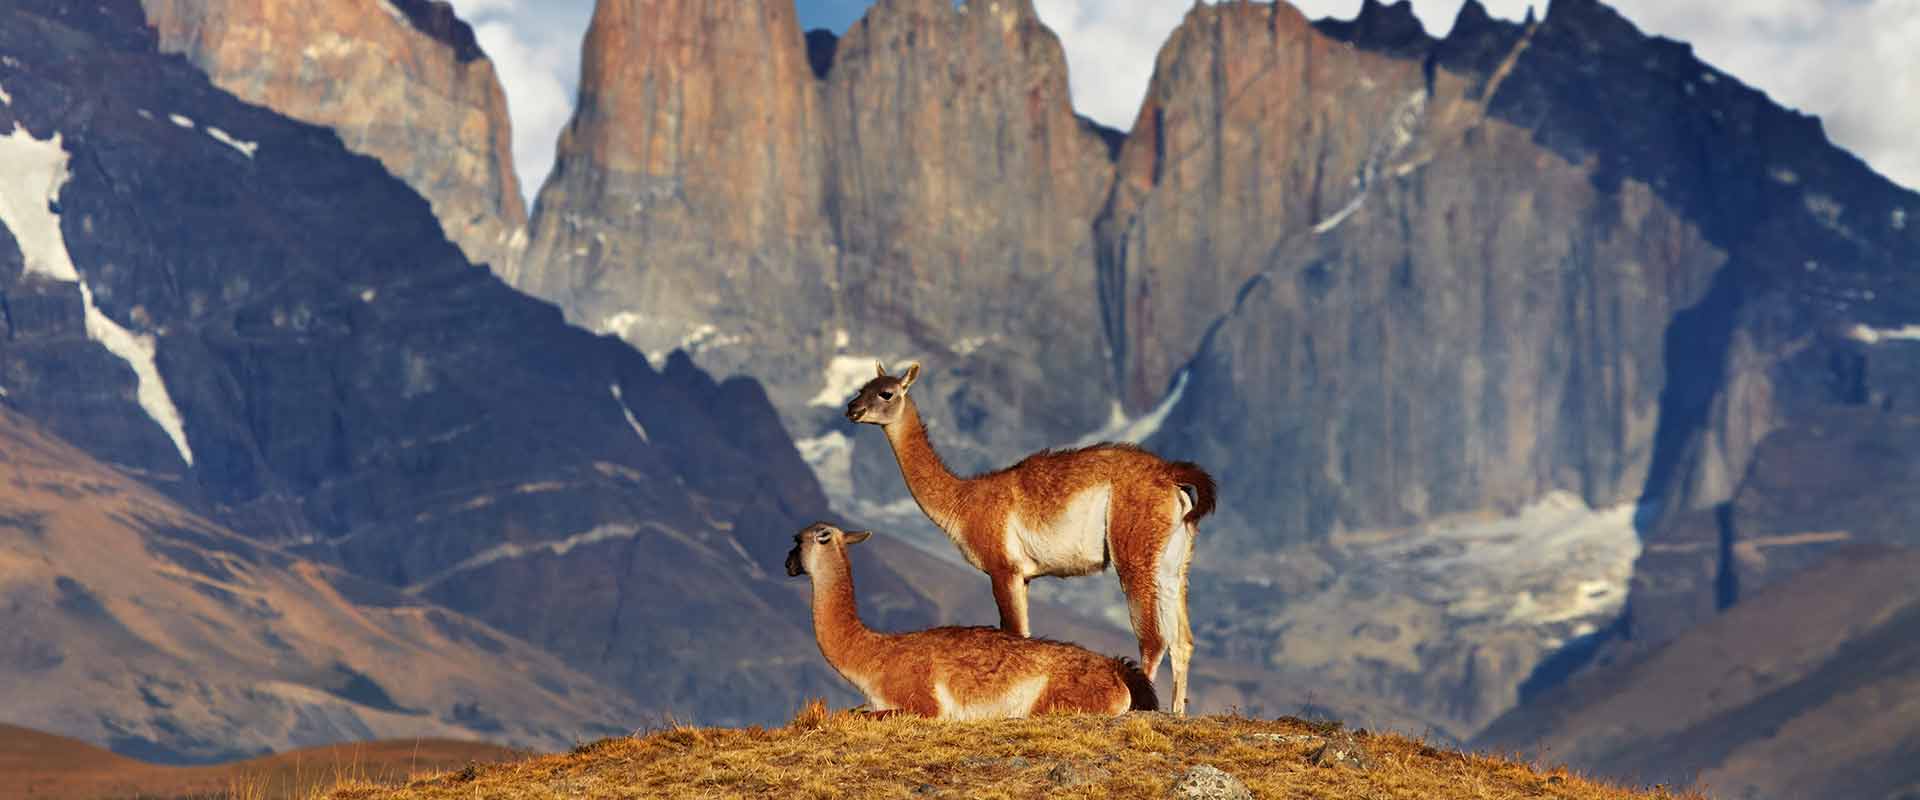 Two llamas standing together on top of a mountain, Patagonia